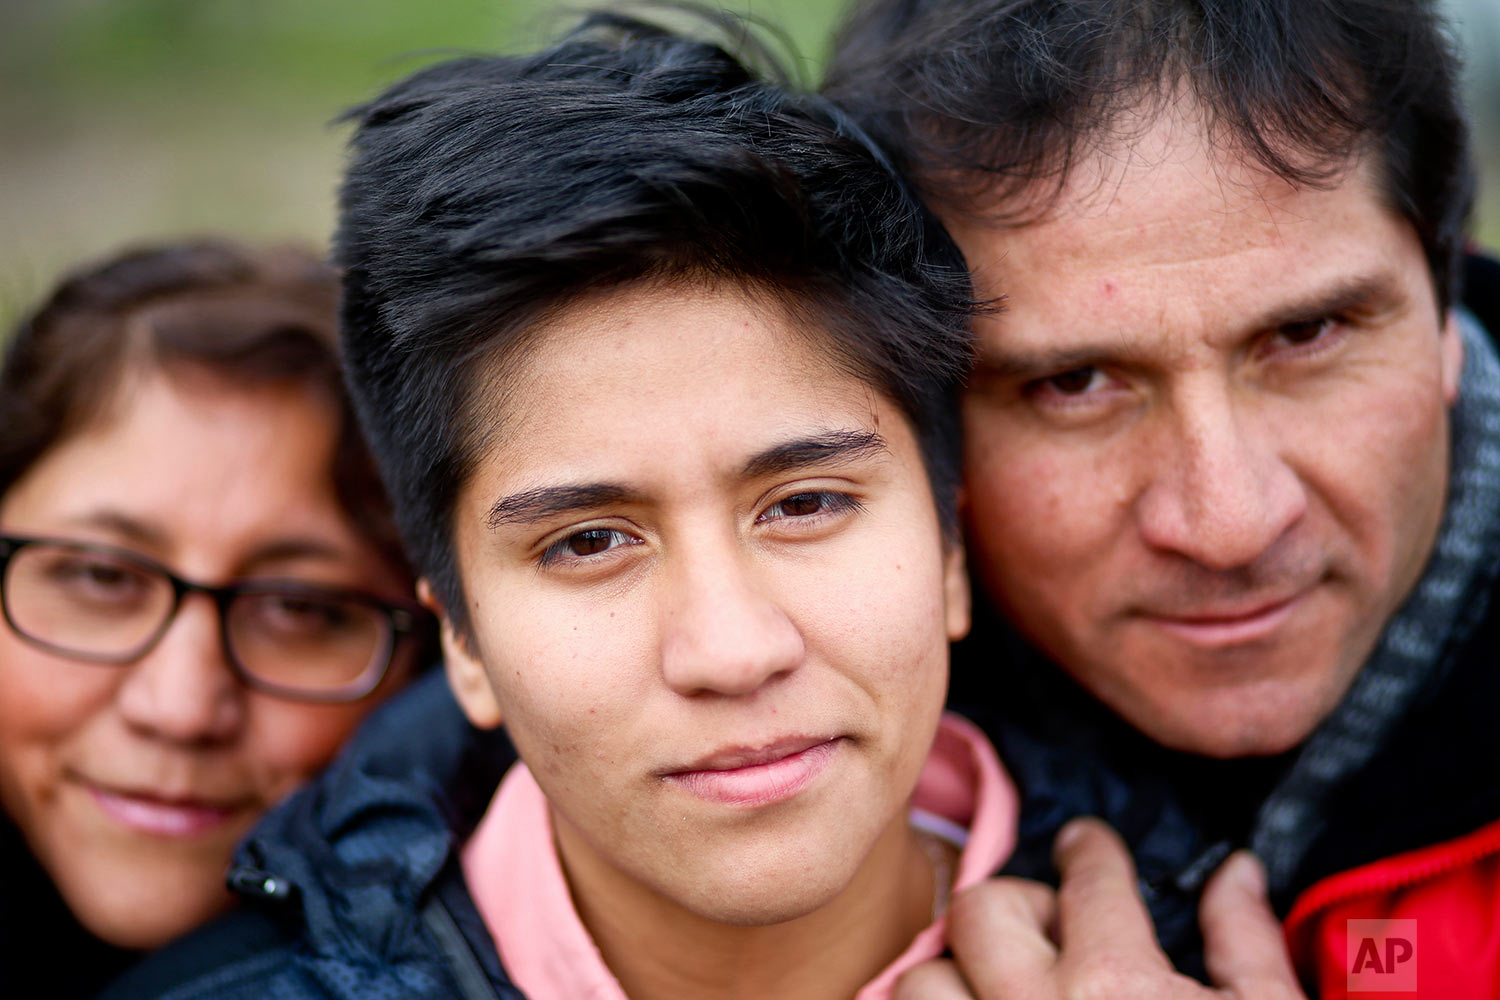  In this Aug. 15, 2017 photo, transgender boy Tobias, 16, poses for a portrait with his parents Paulina and Carlos at a park in Santiago, Chile. The family was at the park for a workshop that focused on gender and empowerment. (AP Photo/Esteban Felix